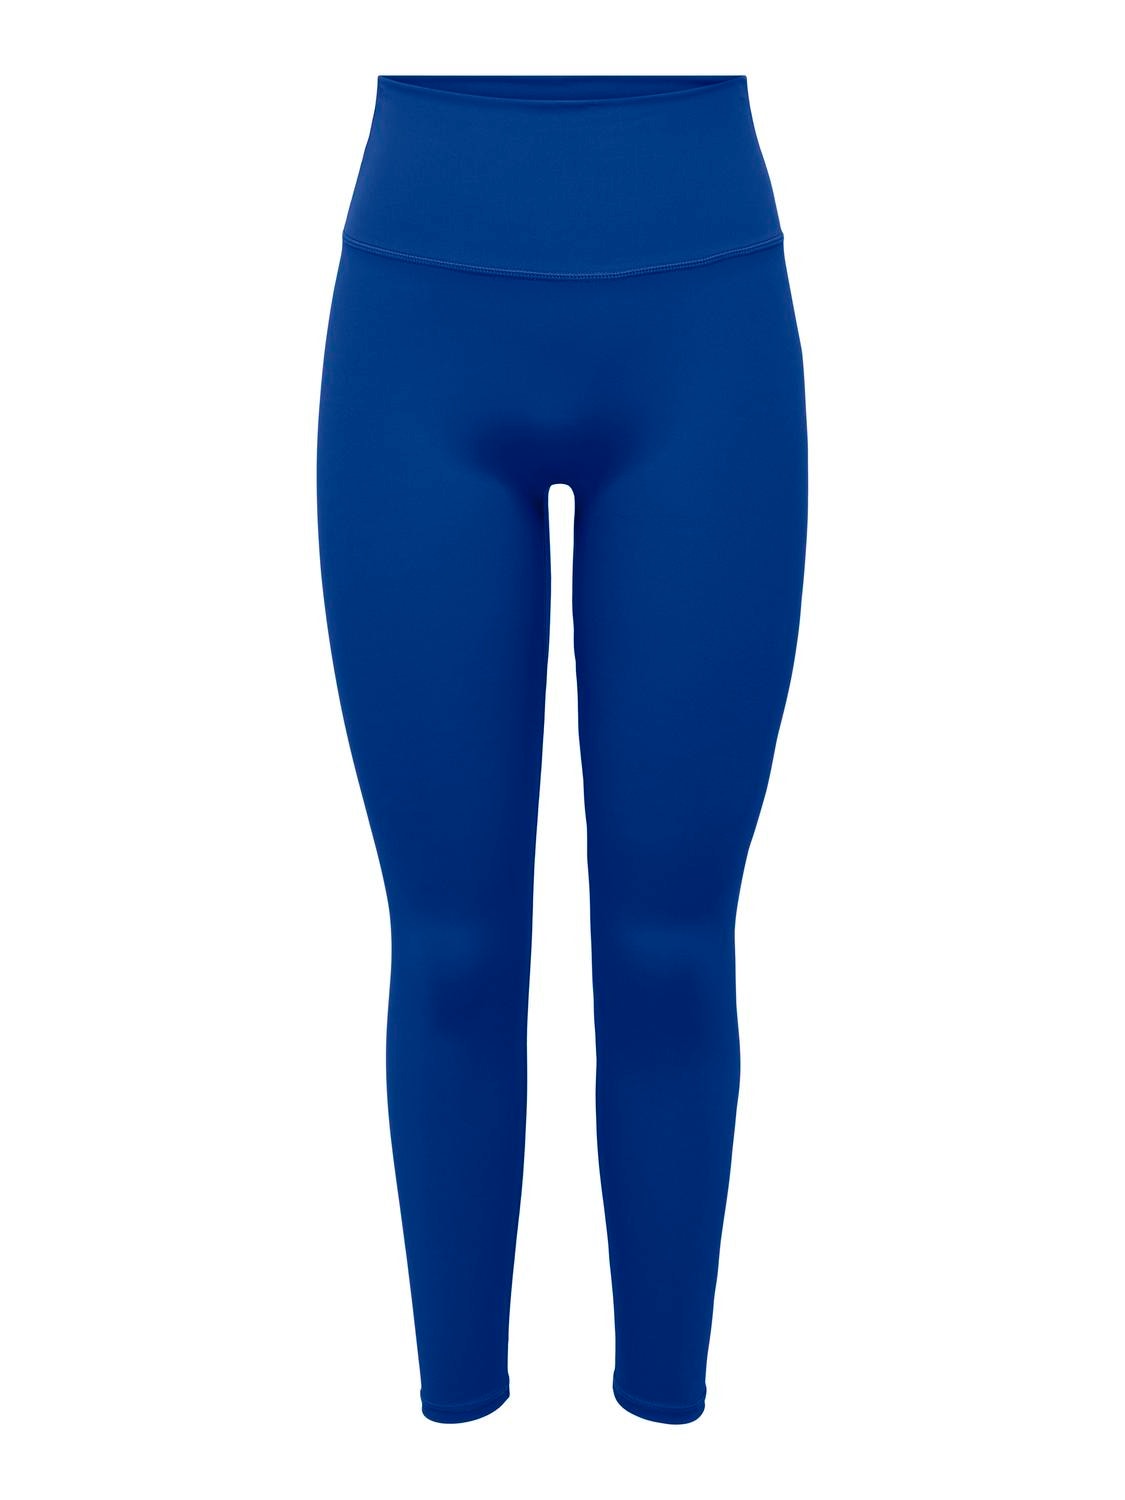 ONLY Leggings Corte tight Talle muy alto -Surf the Web - 15303178